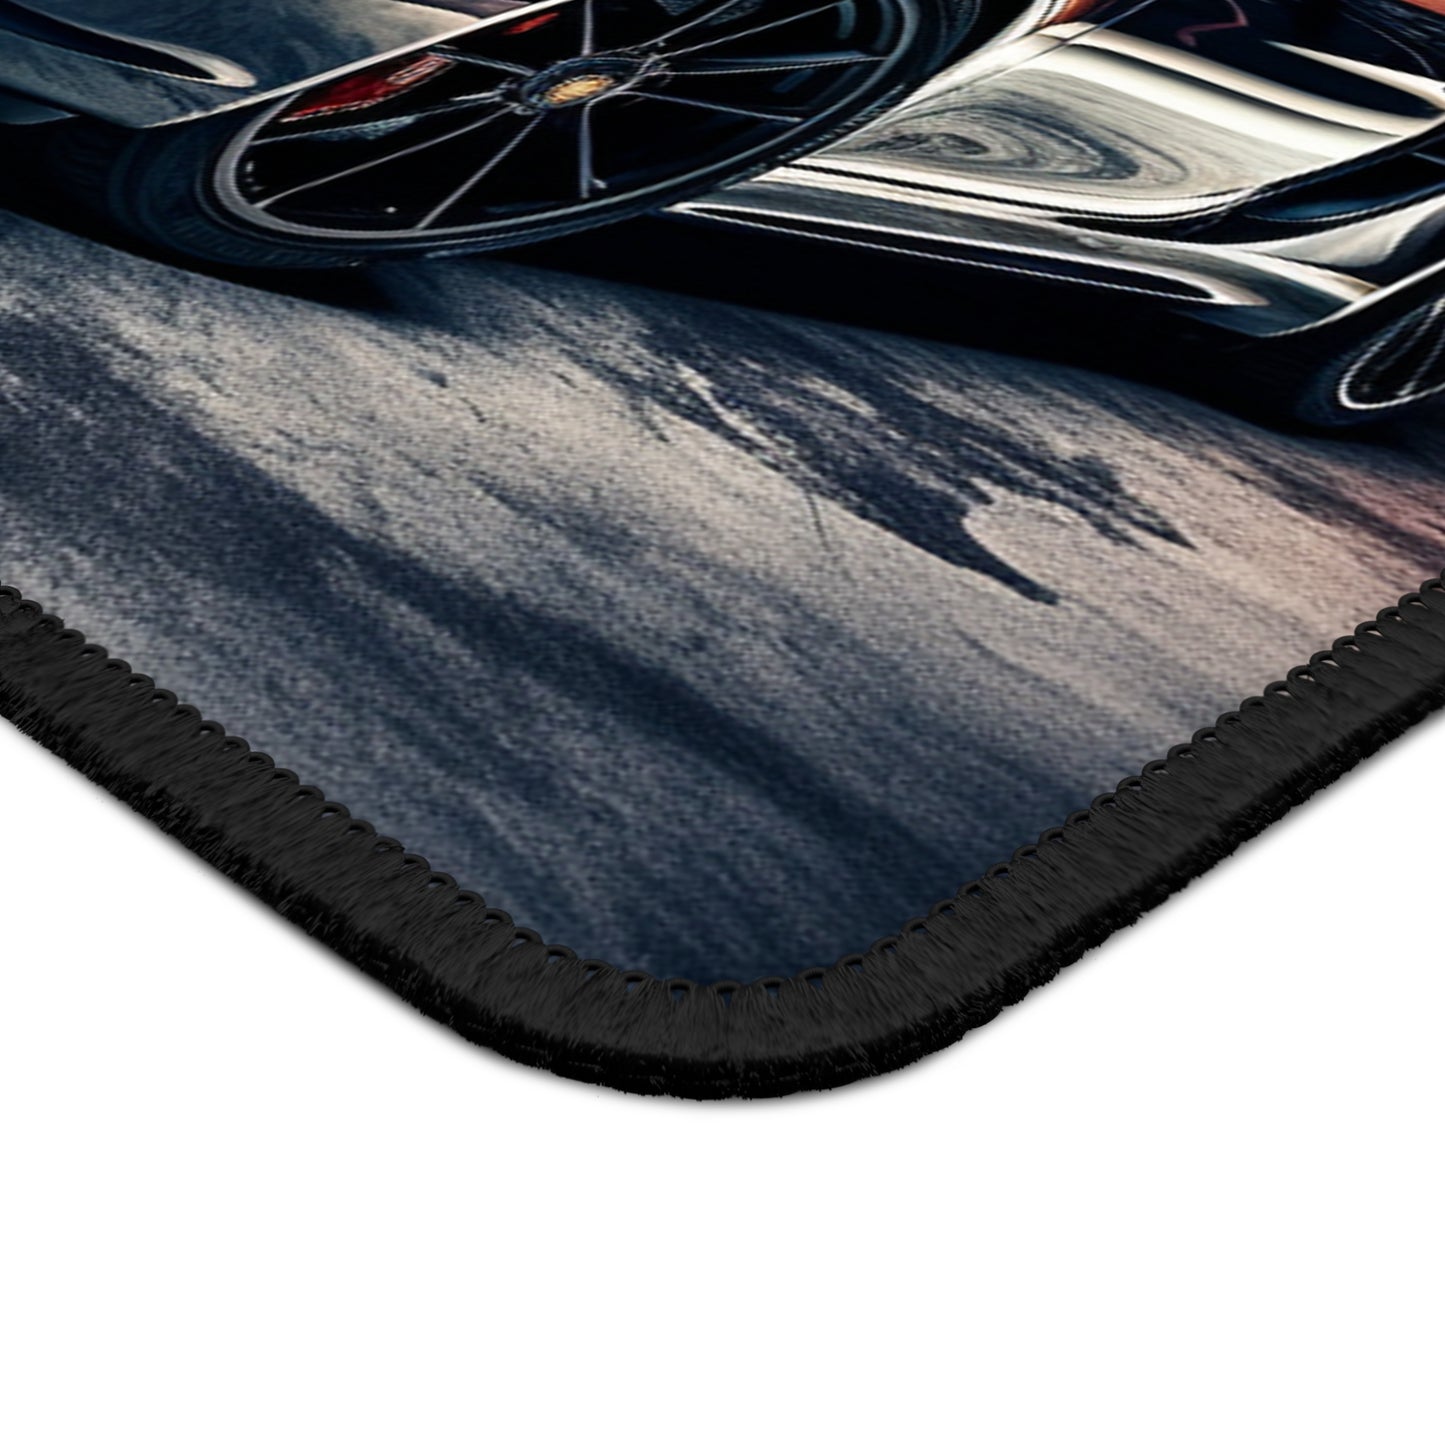 Gaming Mouse Pad  Abstract American Flag Background Porsche 2